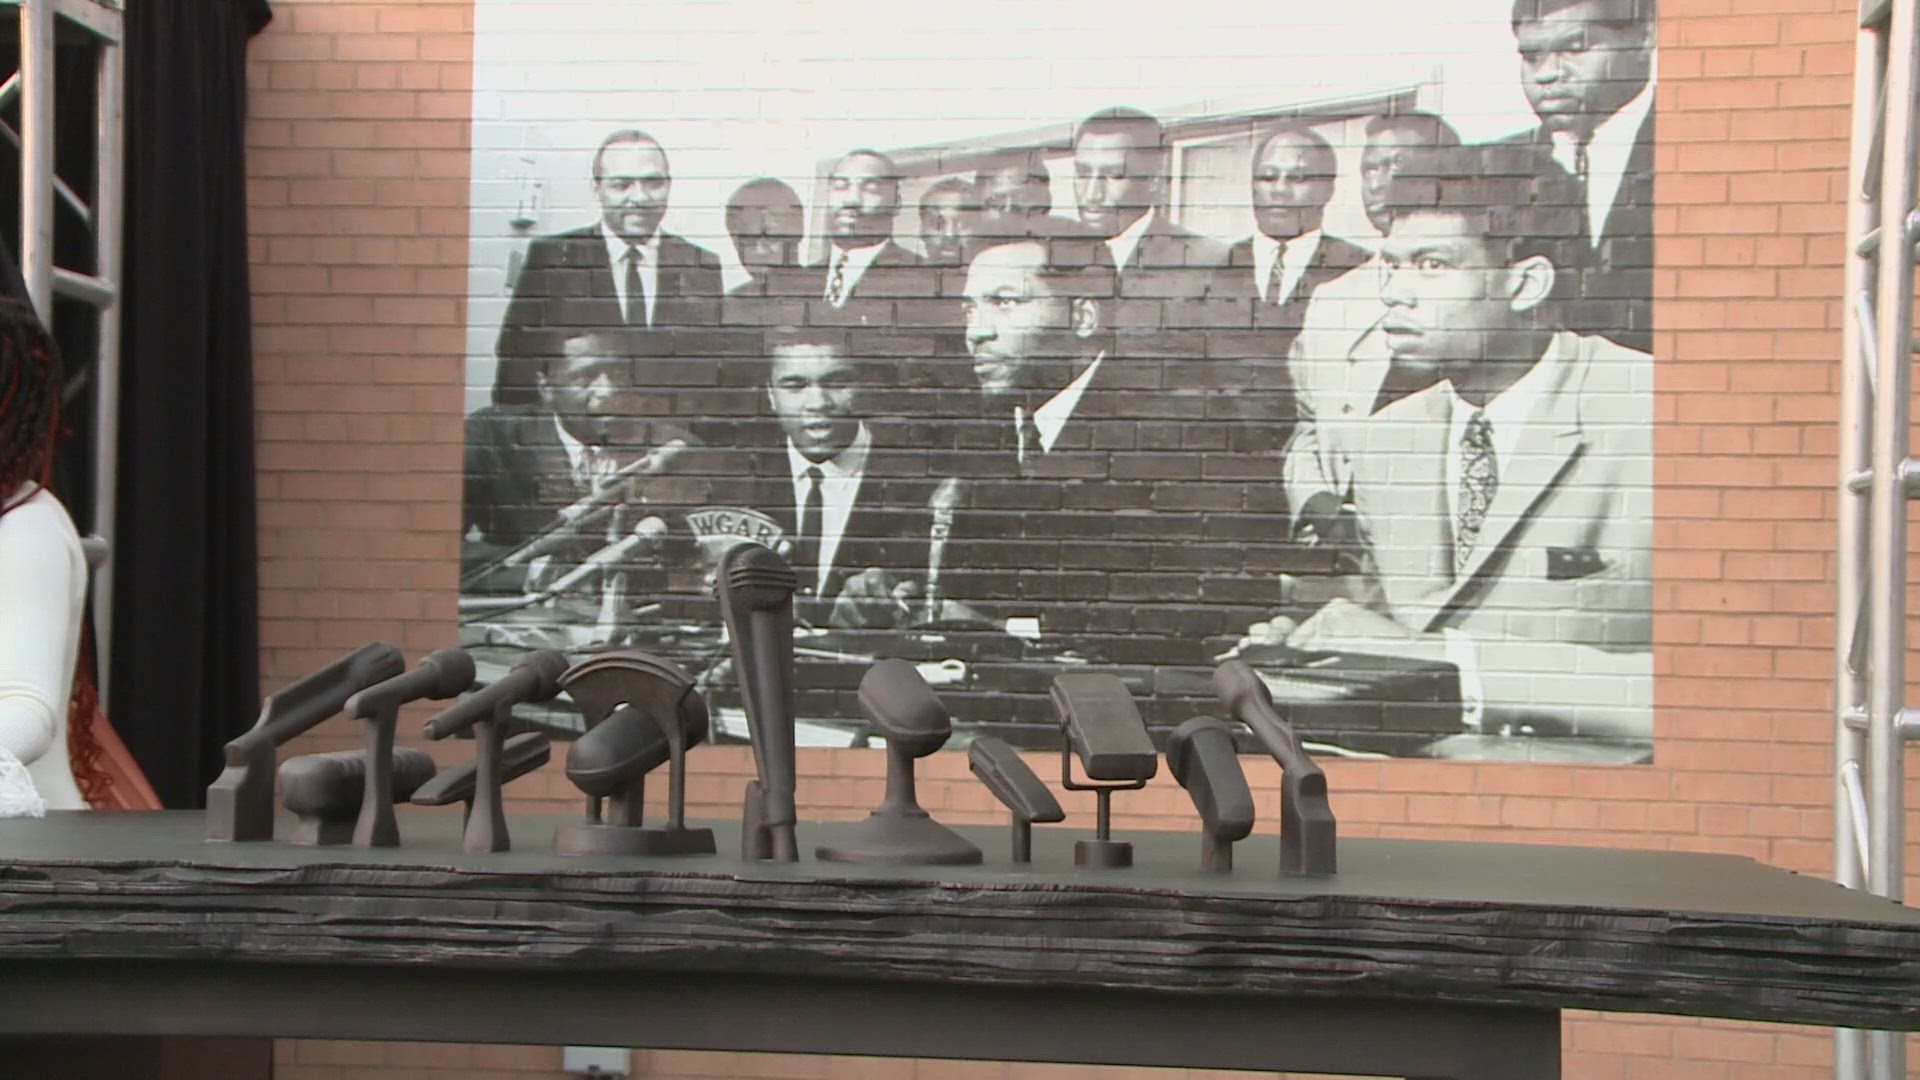 The art piece depicts the press conference table that Ali, Brown and others sat at following their meeting, viewed as a pivotal moment in the civil rights movement.